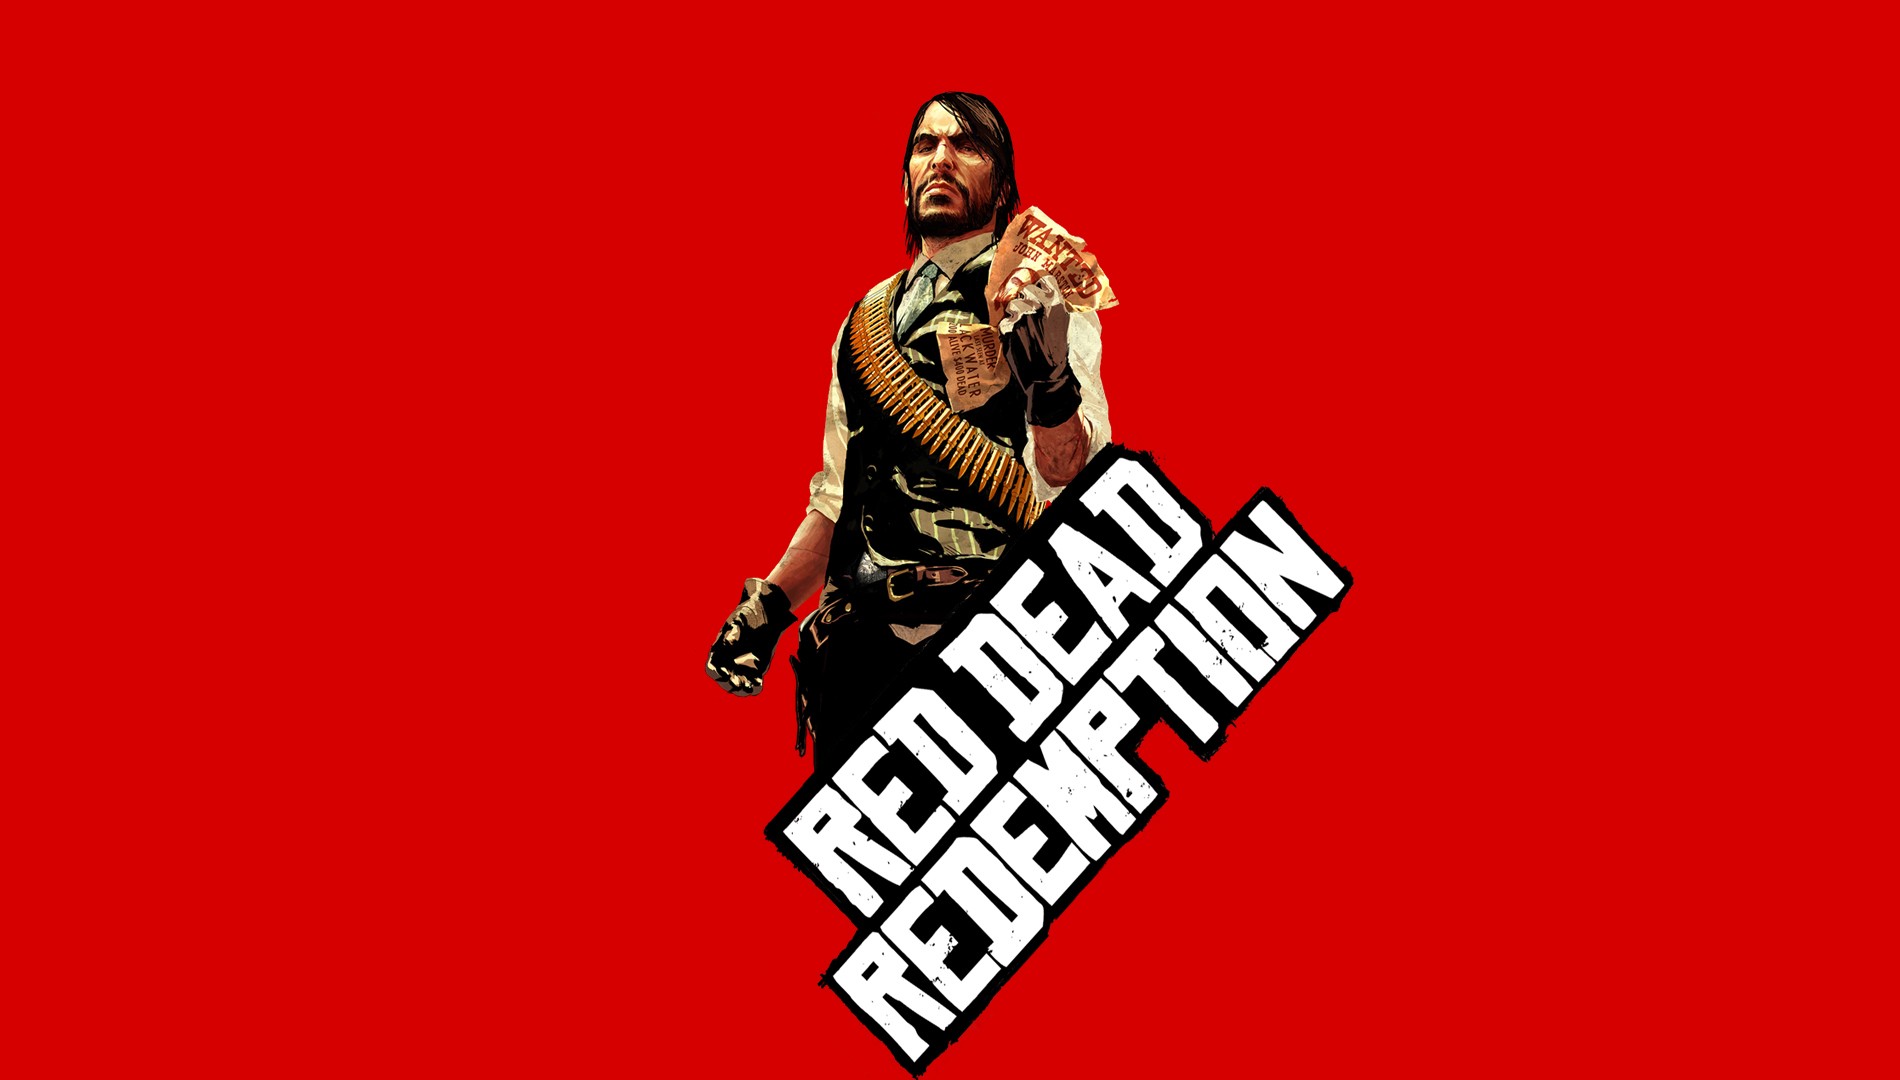 General 1900x1080 John Marston Red Dead Redemption video games red background simple background video game men video game characters Wanted posters